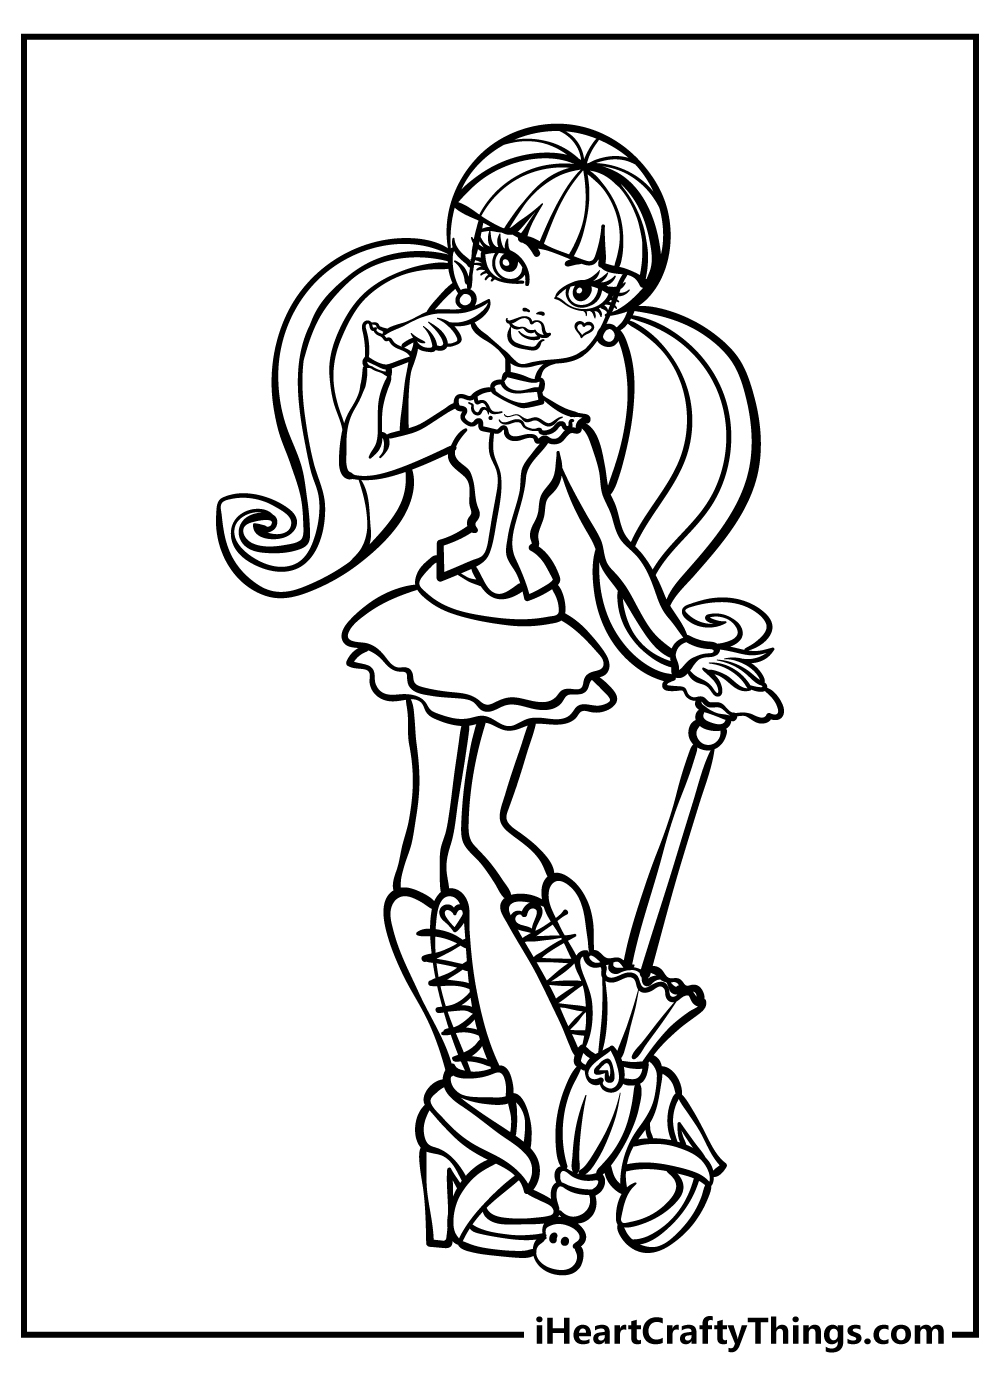 Monster high coloring pages free printables